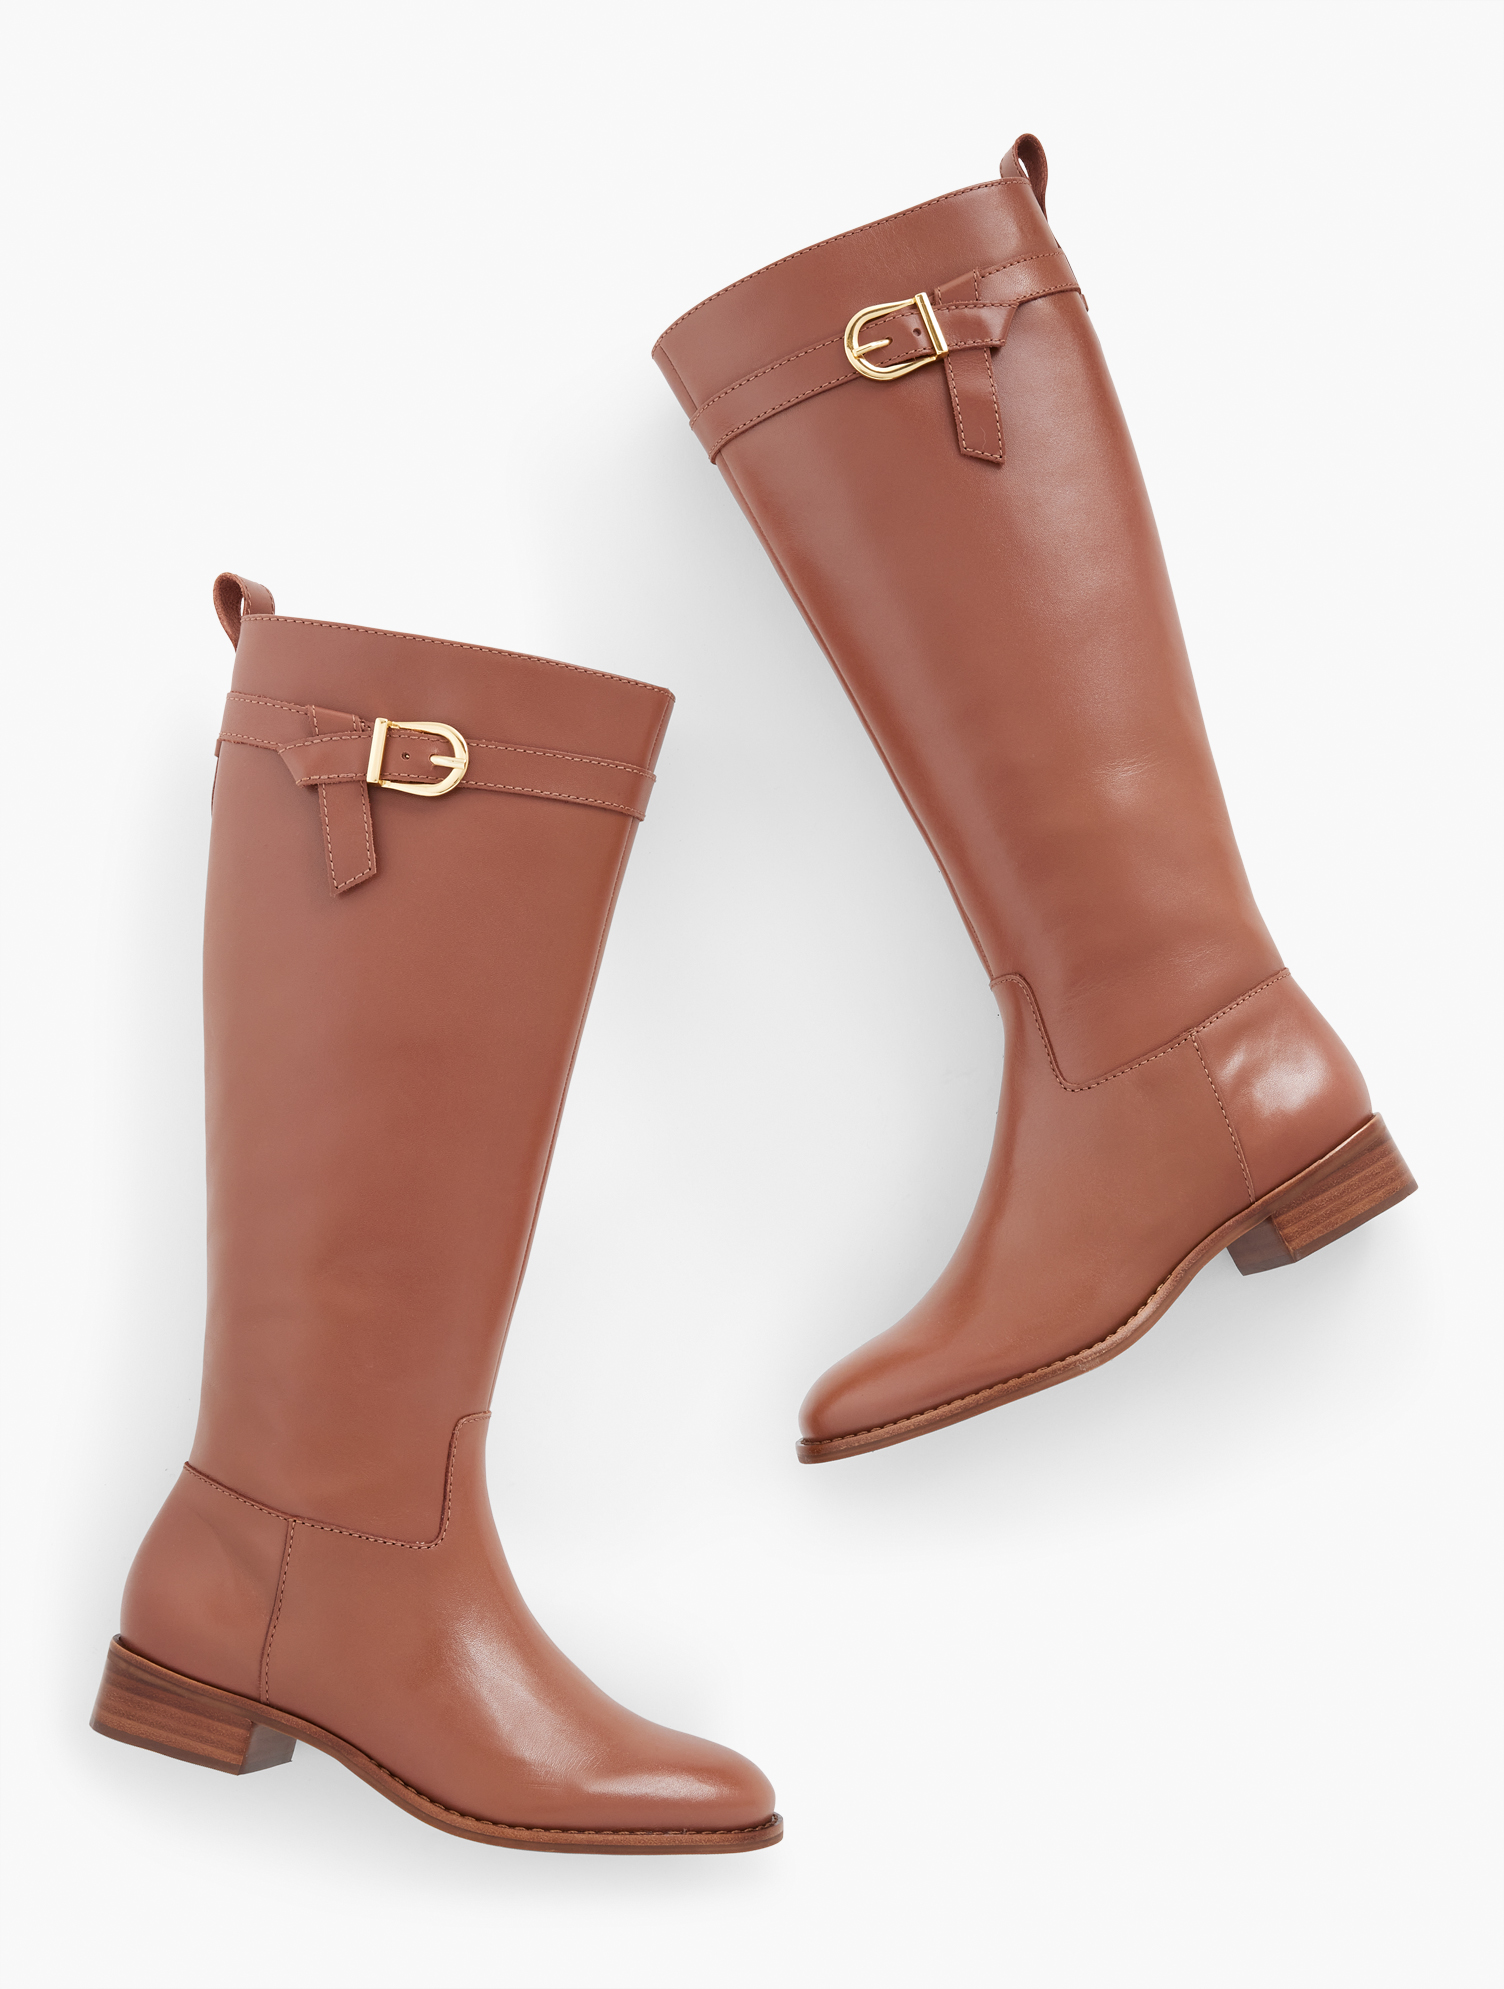 Talbots Tish Tie Leather Riding Boots - Extended Calf - Cognac - 6m